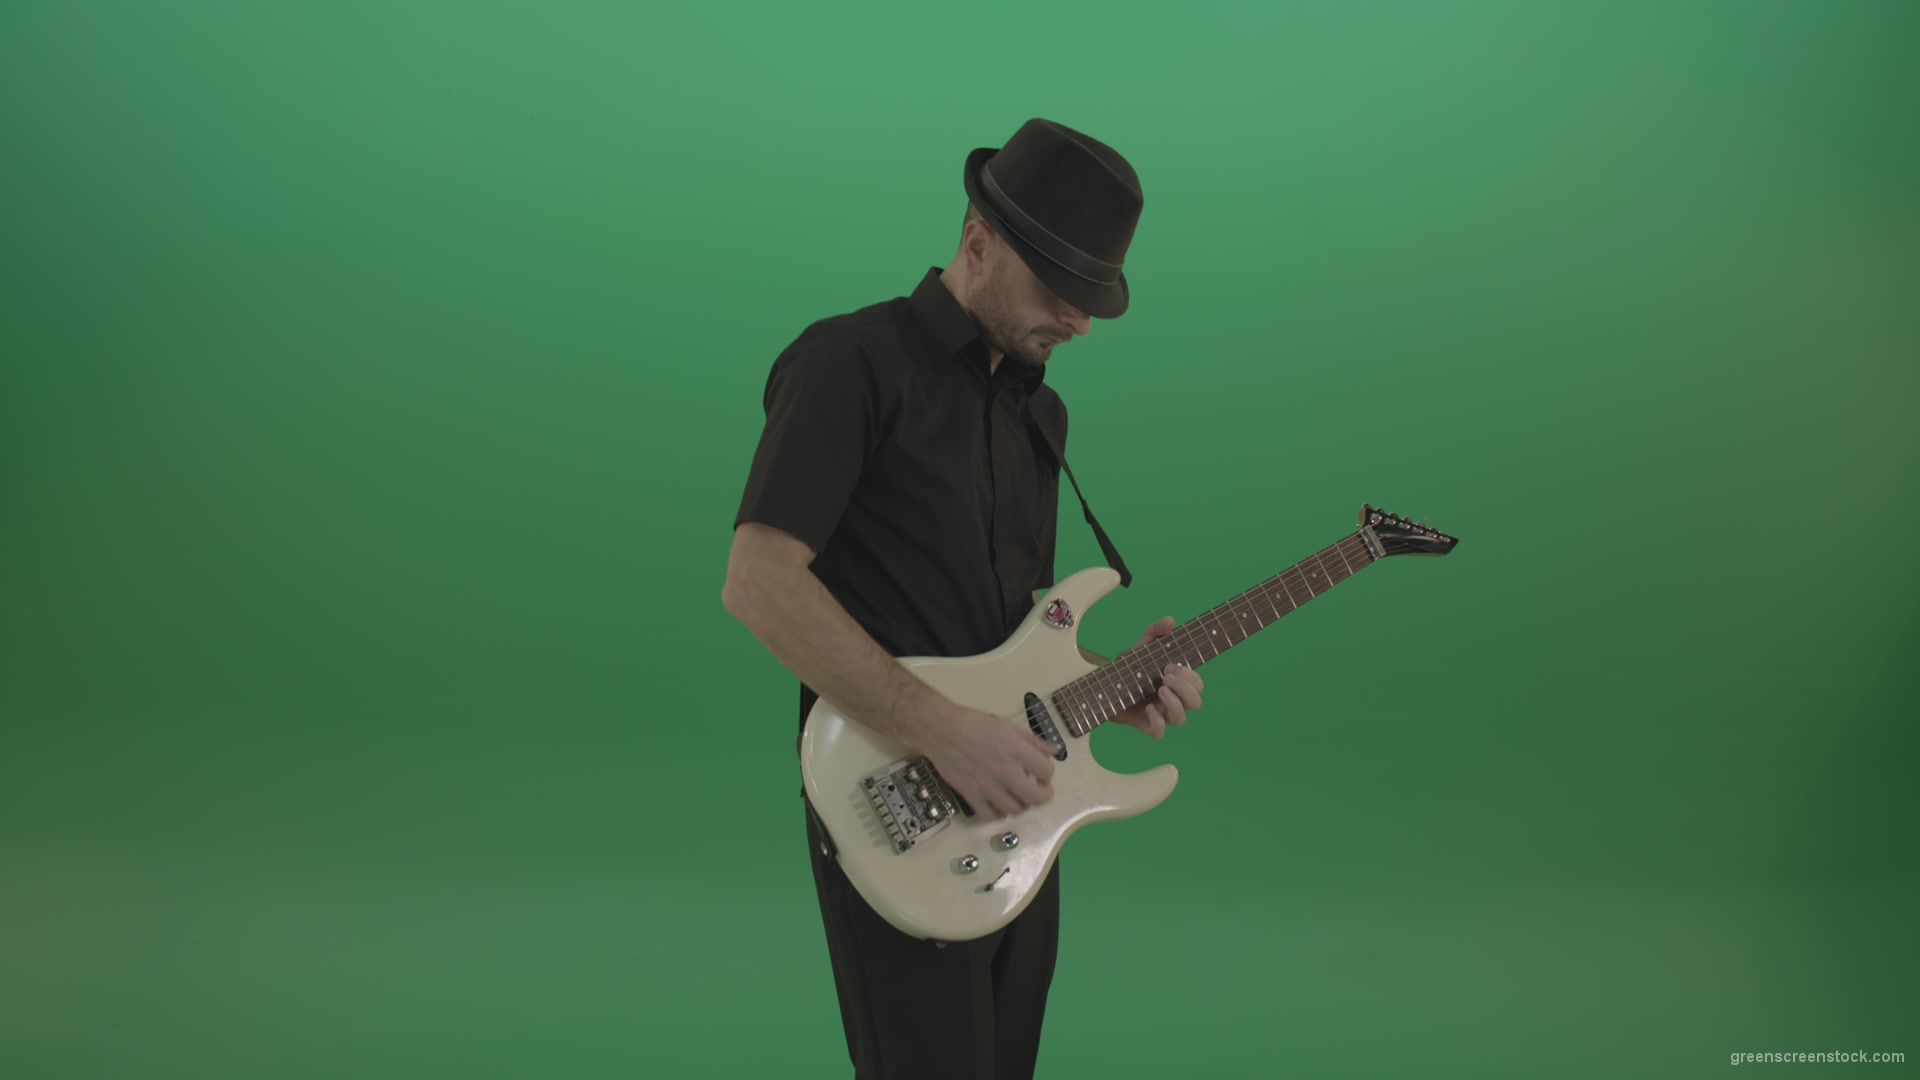 Virtuoso-guitarist-in-black-costume-and-hat-playing-solo-on-white-electro-guitar-siolated-on-green-screen_007 Green Screen Stock